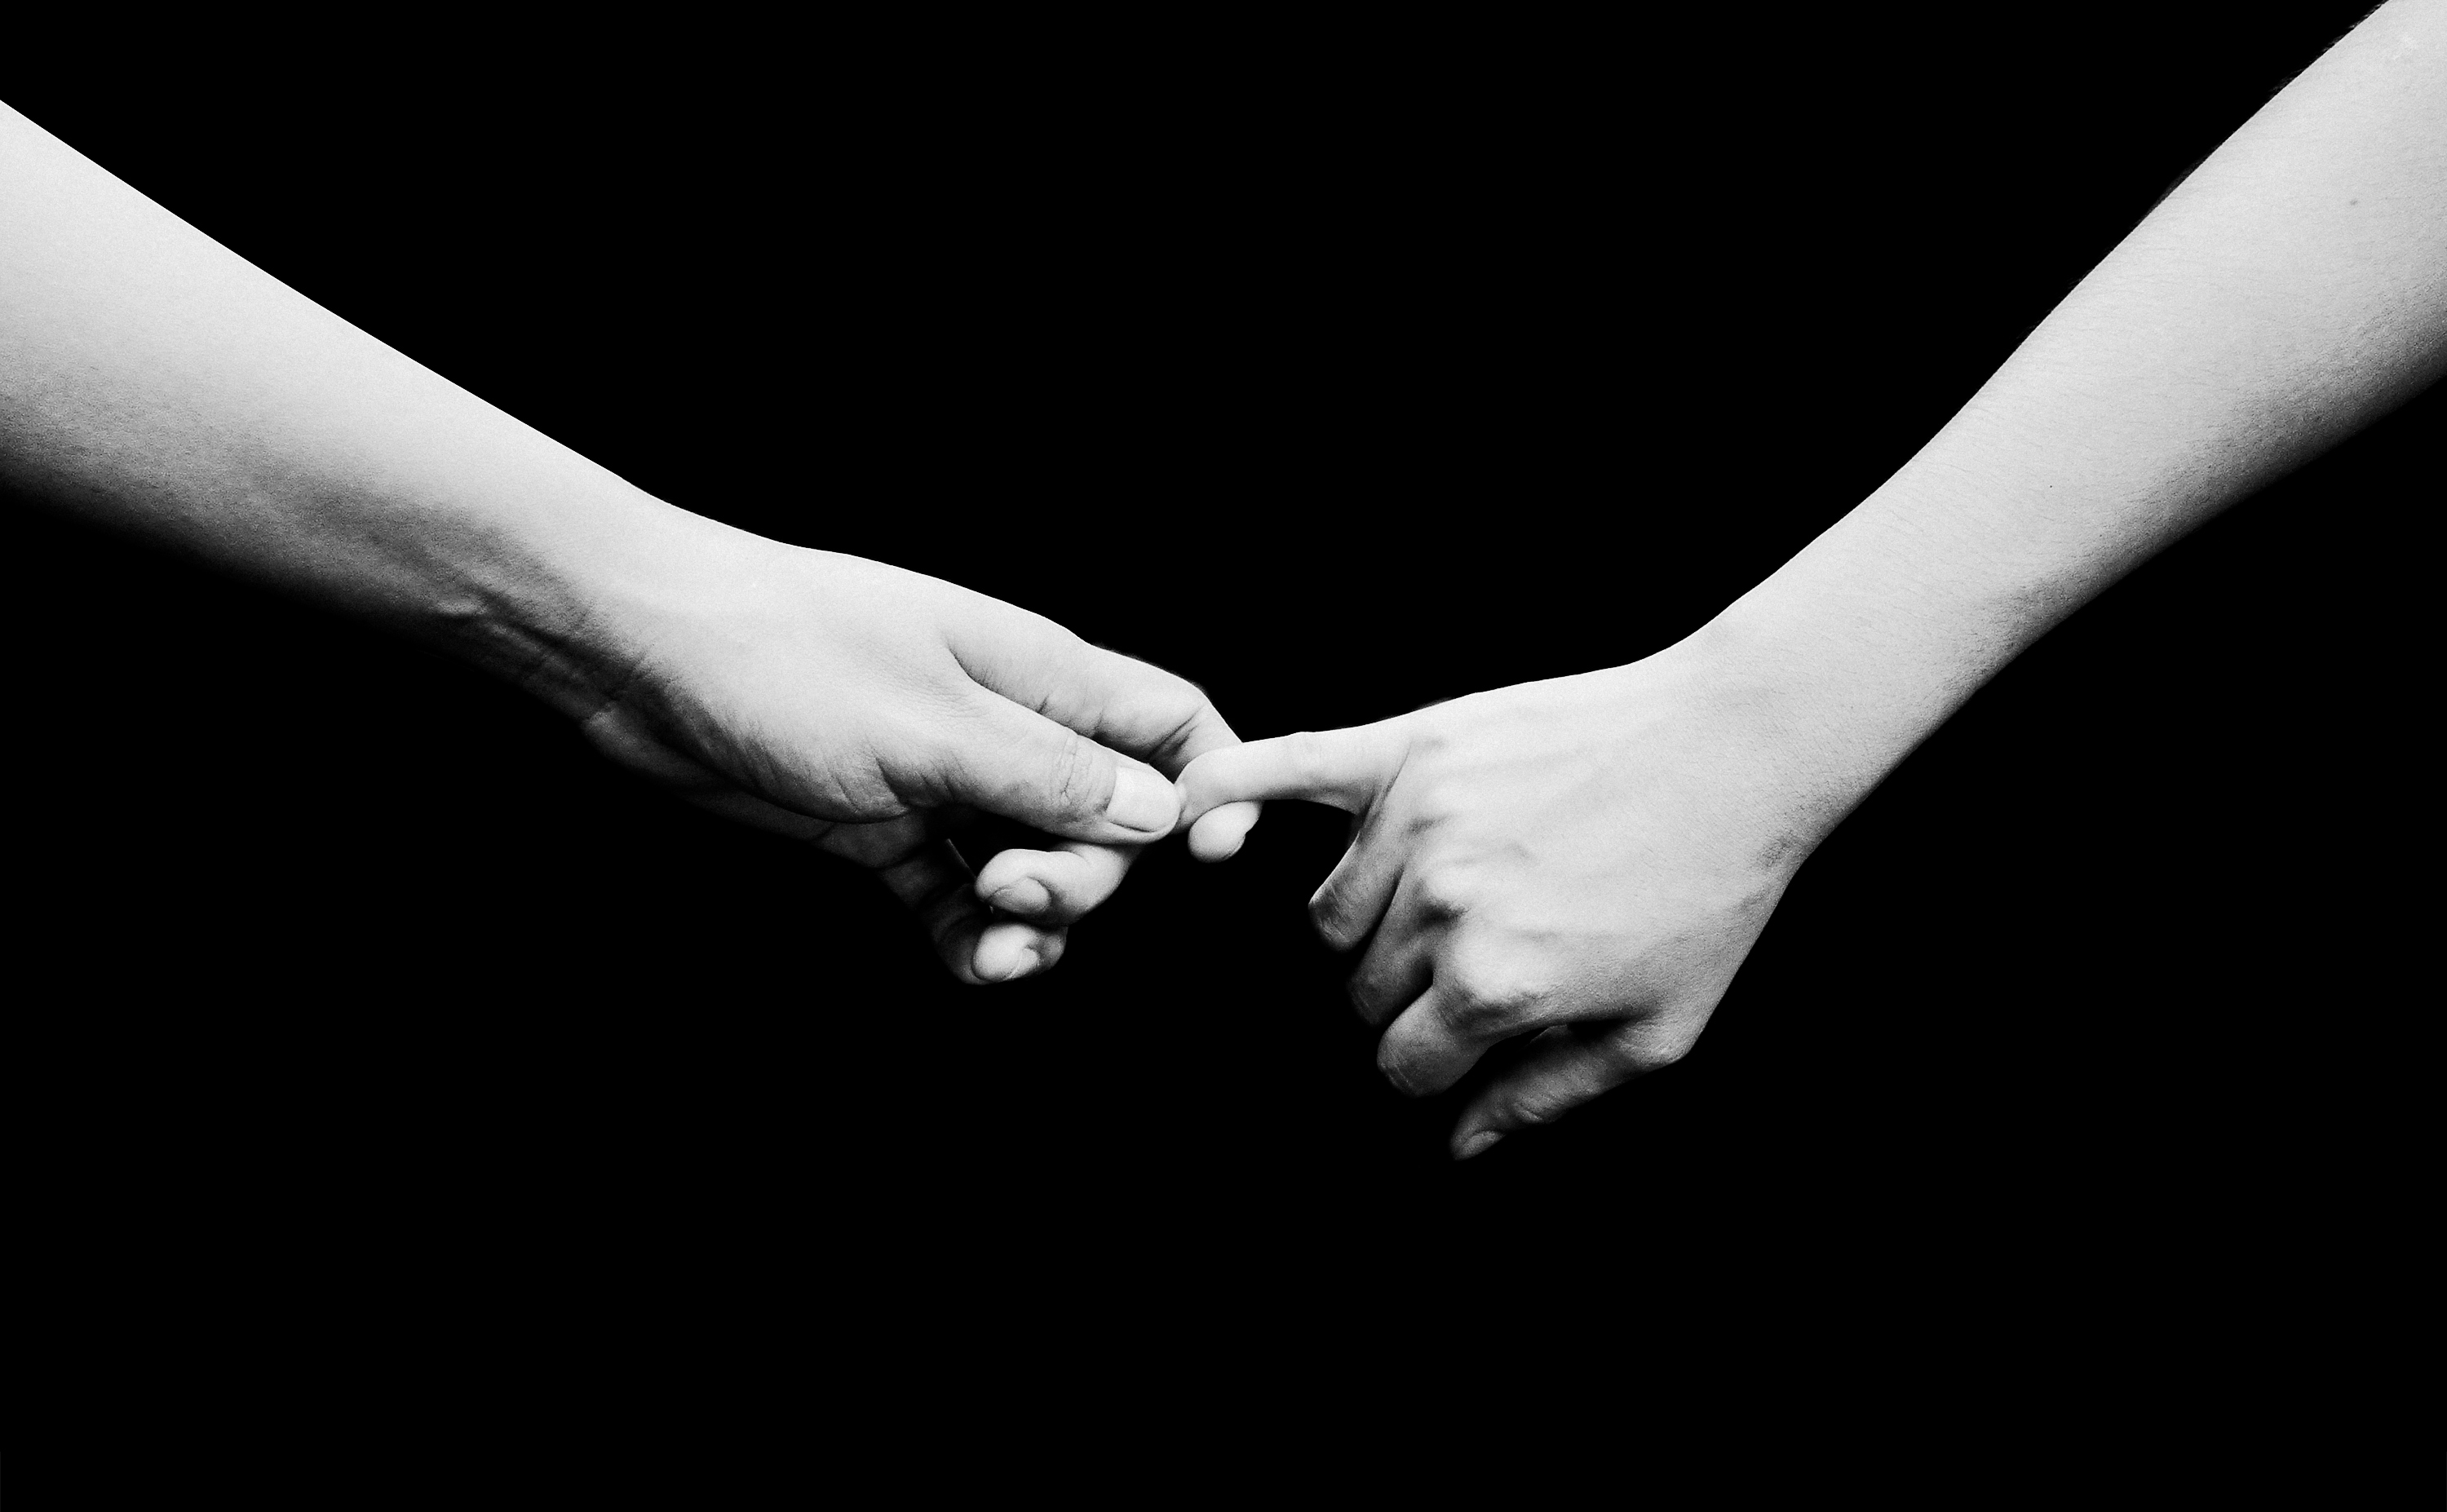 119894 download wallpaper love, couple, pair, hands, bw, chb, tenderness screensavers and pictures for free